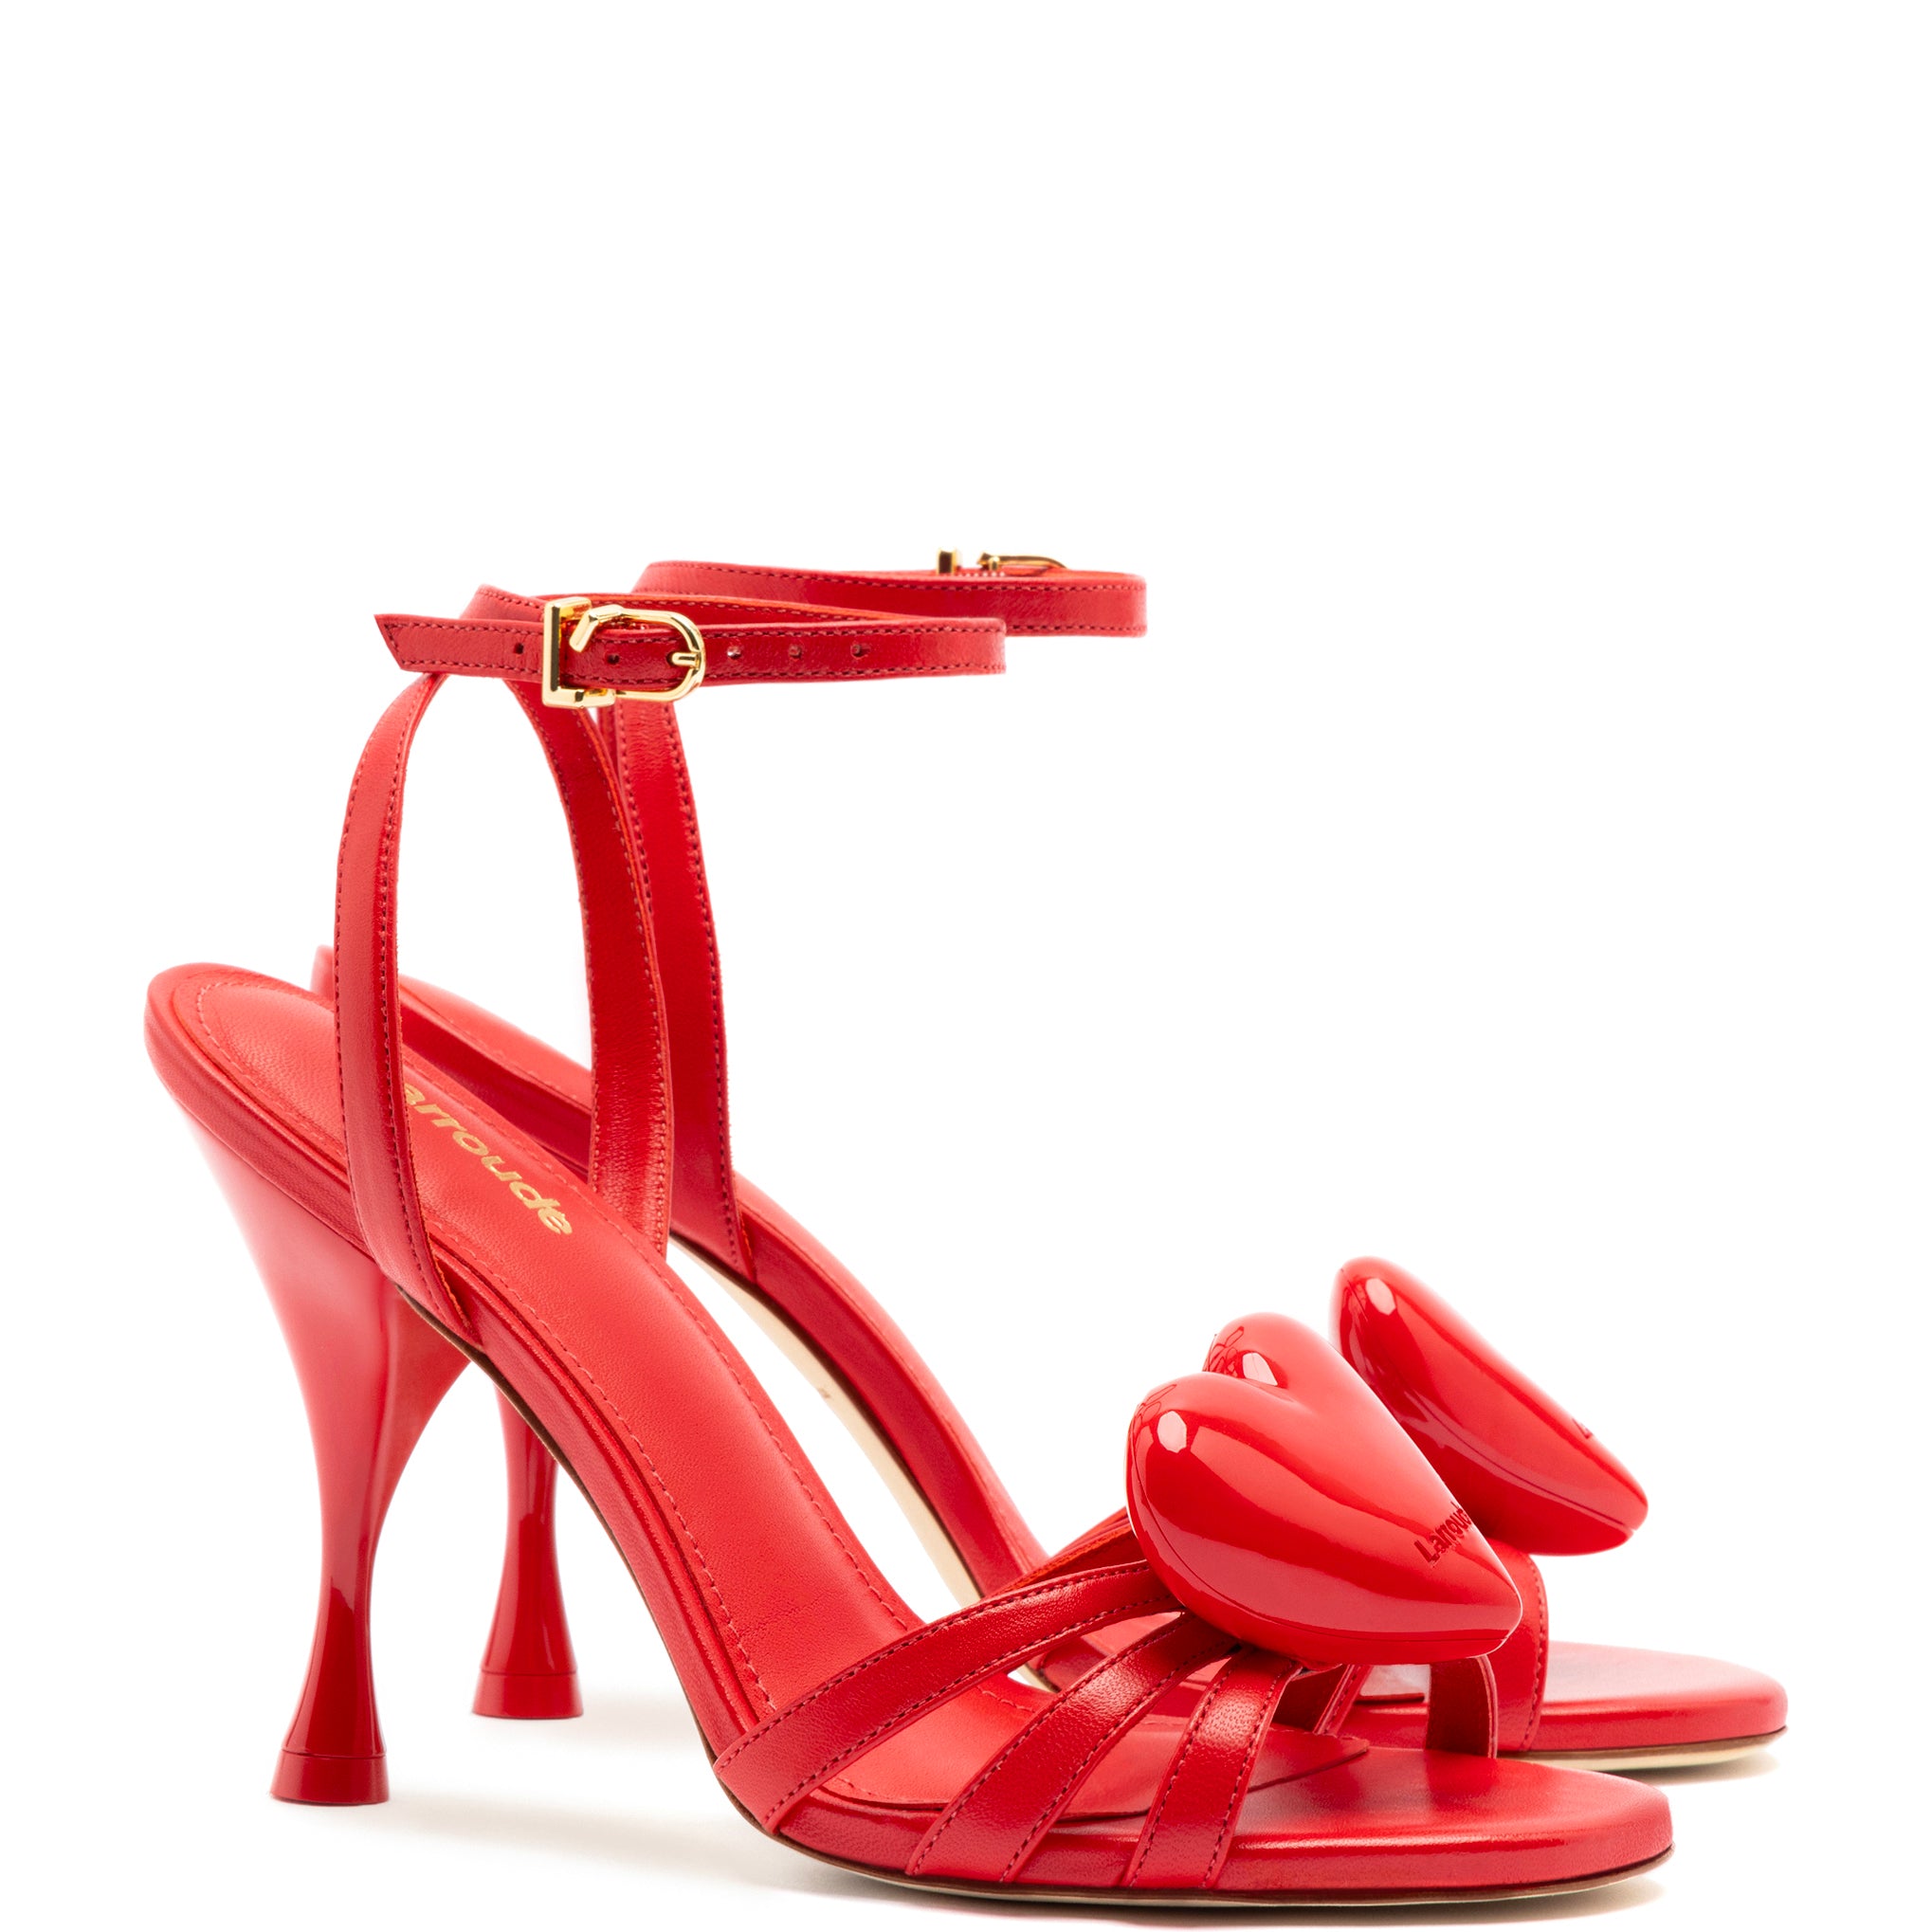 Amore Sandal in Scarlet Leather